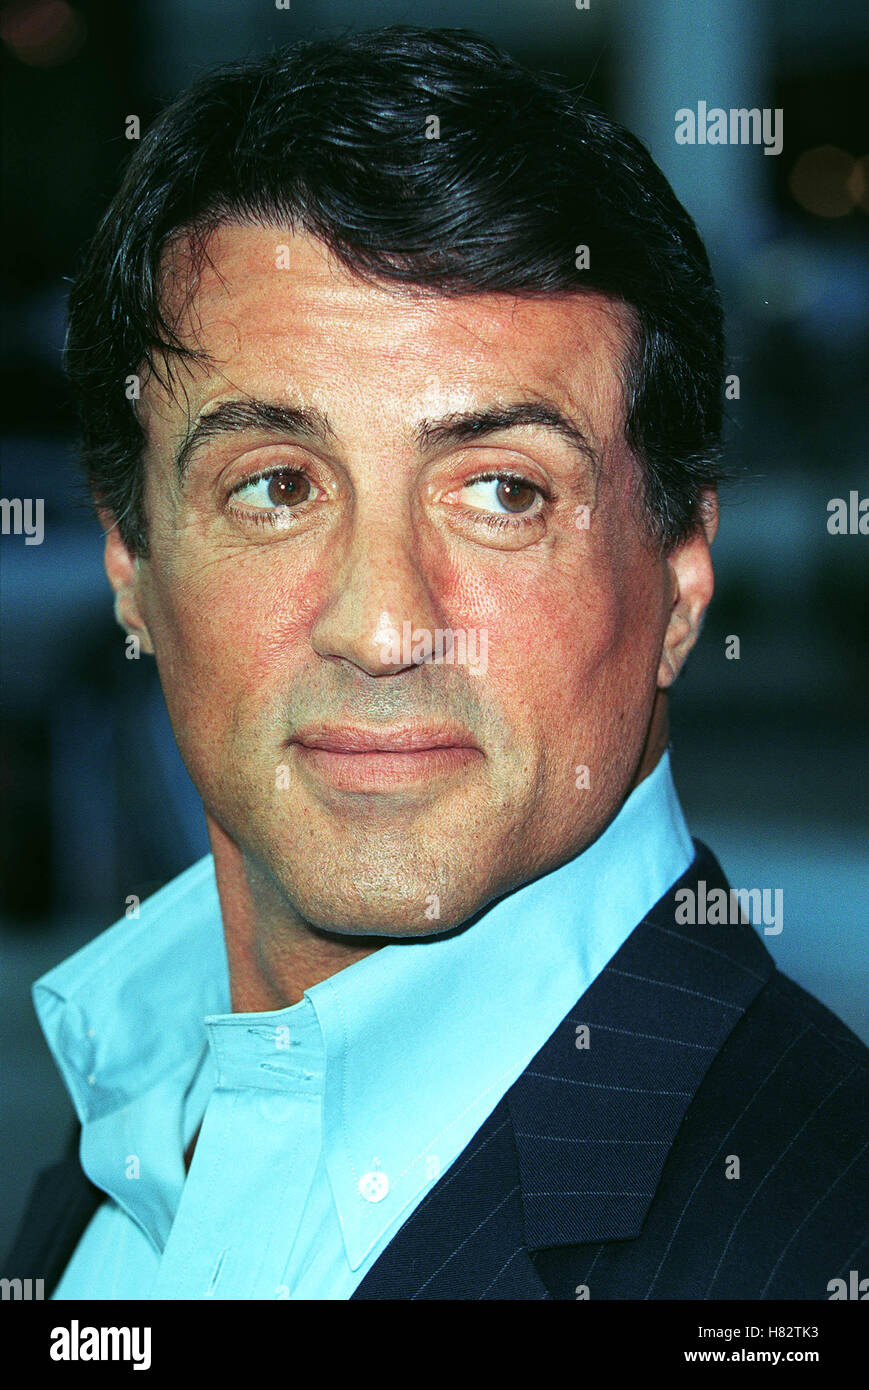 SYLVESTER STALLONE 'ORIGINAL SIN' FILM PREMIERE HOLLYWOOD LOS ANGELES USA 31 July 2001 Stock Photo